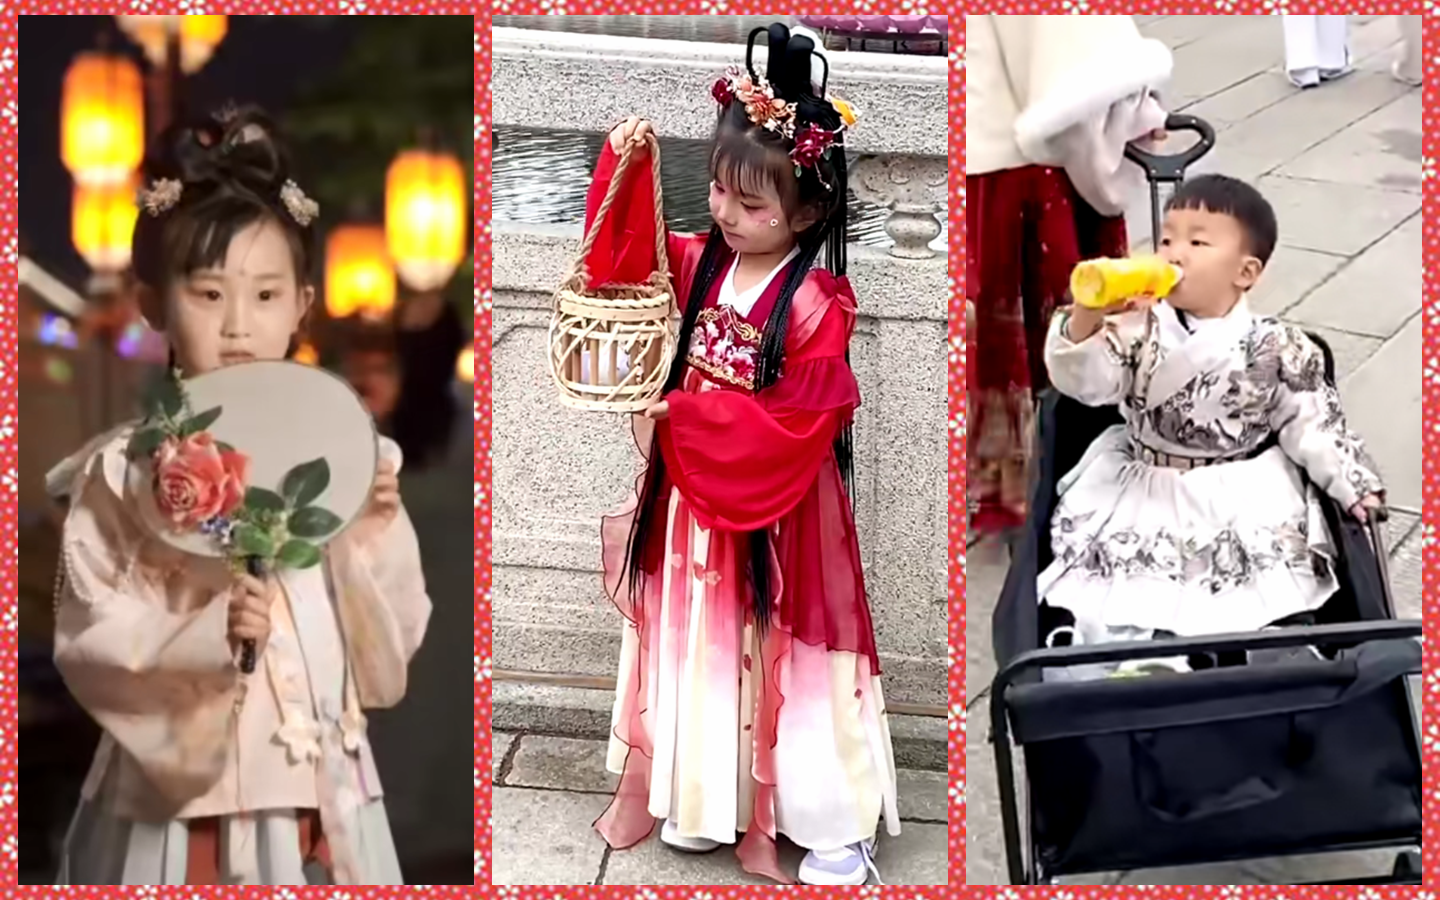 Adorable kids experience Hanfu fashion in C China's Luoyang